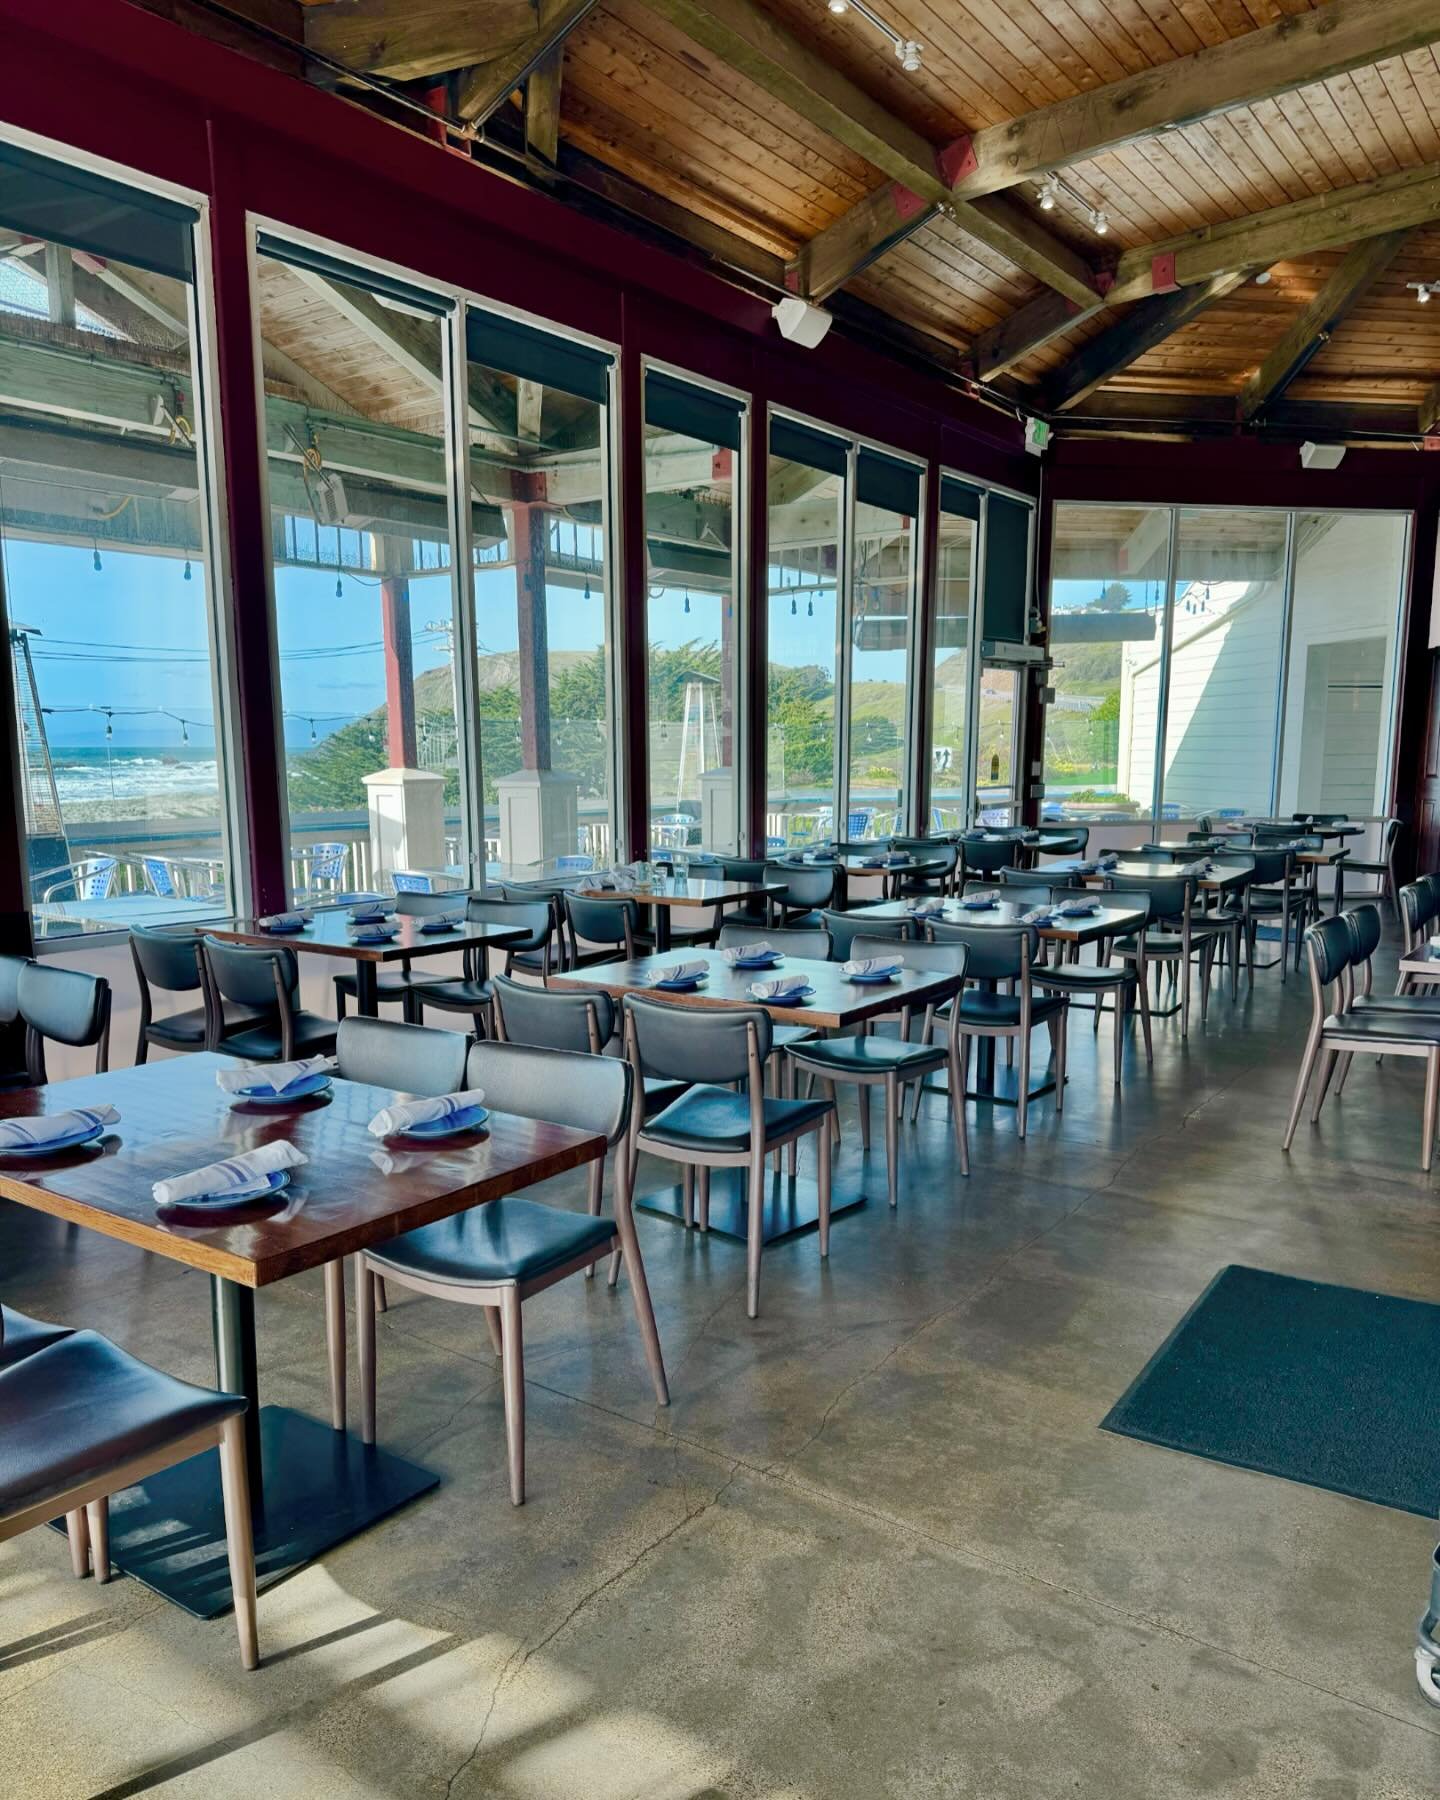 Celebrate your next special occasion or event with us! 🥳

Our dining room overlooking the ocean is the perfect spot to bring your friends, family and coworkers for a memorable event 🤩🌊

We have group dining menus available that will take some of t